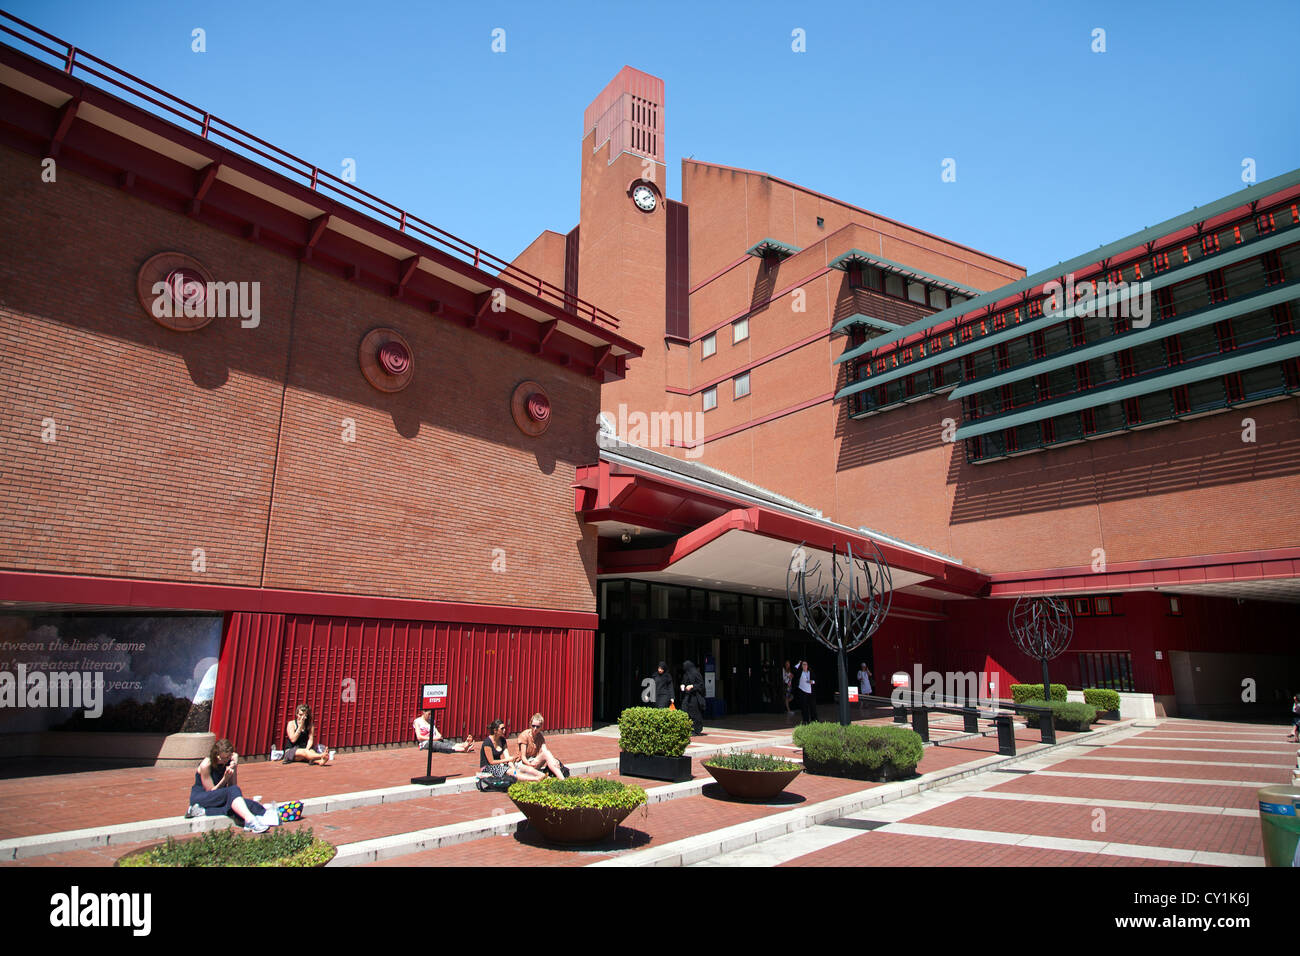 England. London. Euston Road. The British Library building and front entrance courtyard. Stock Photo